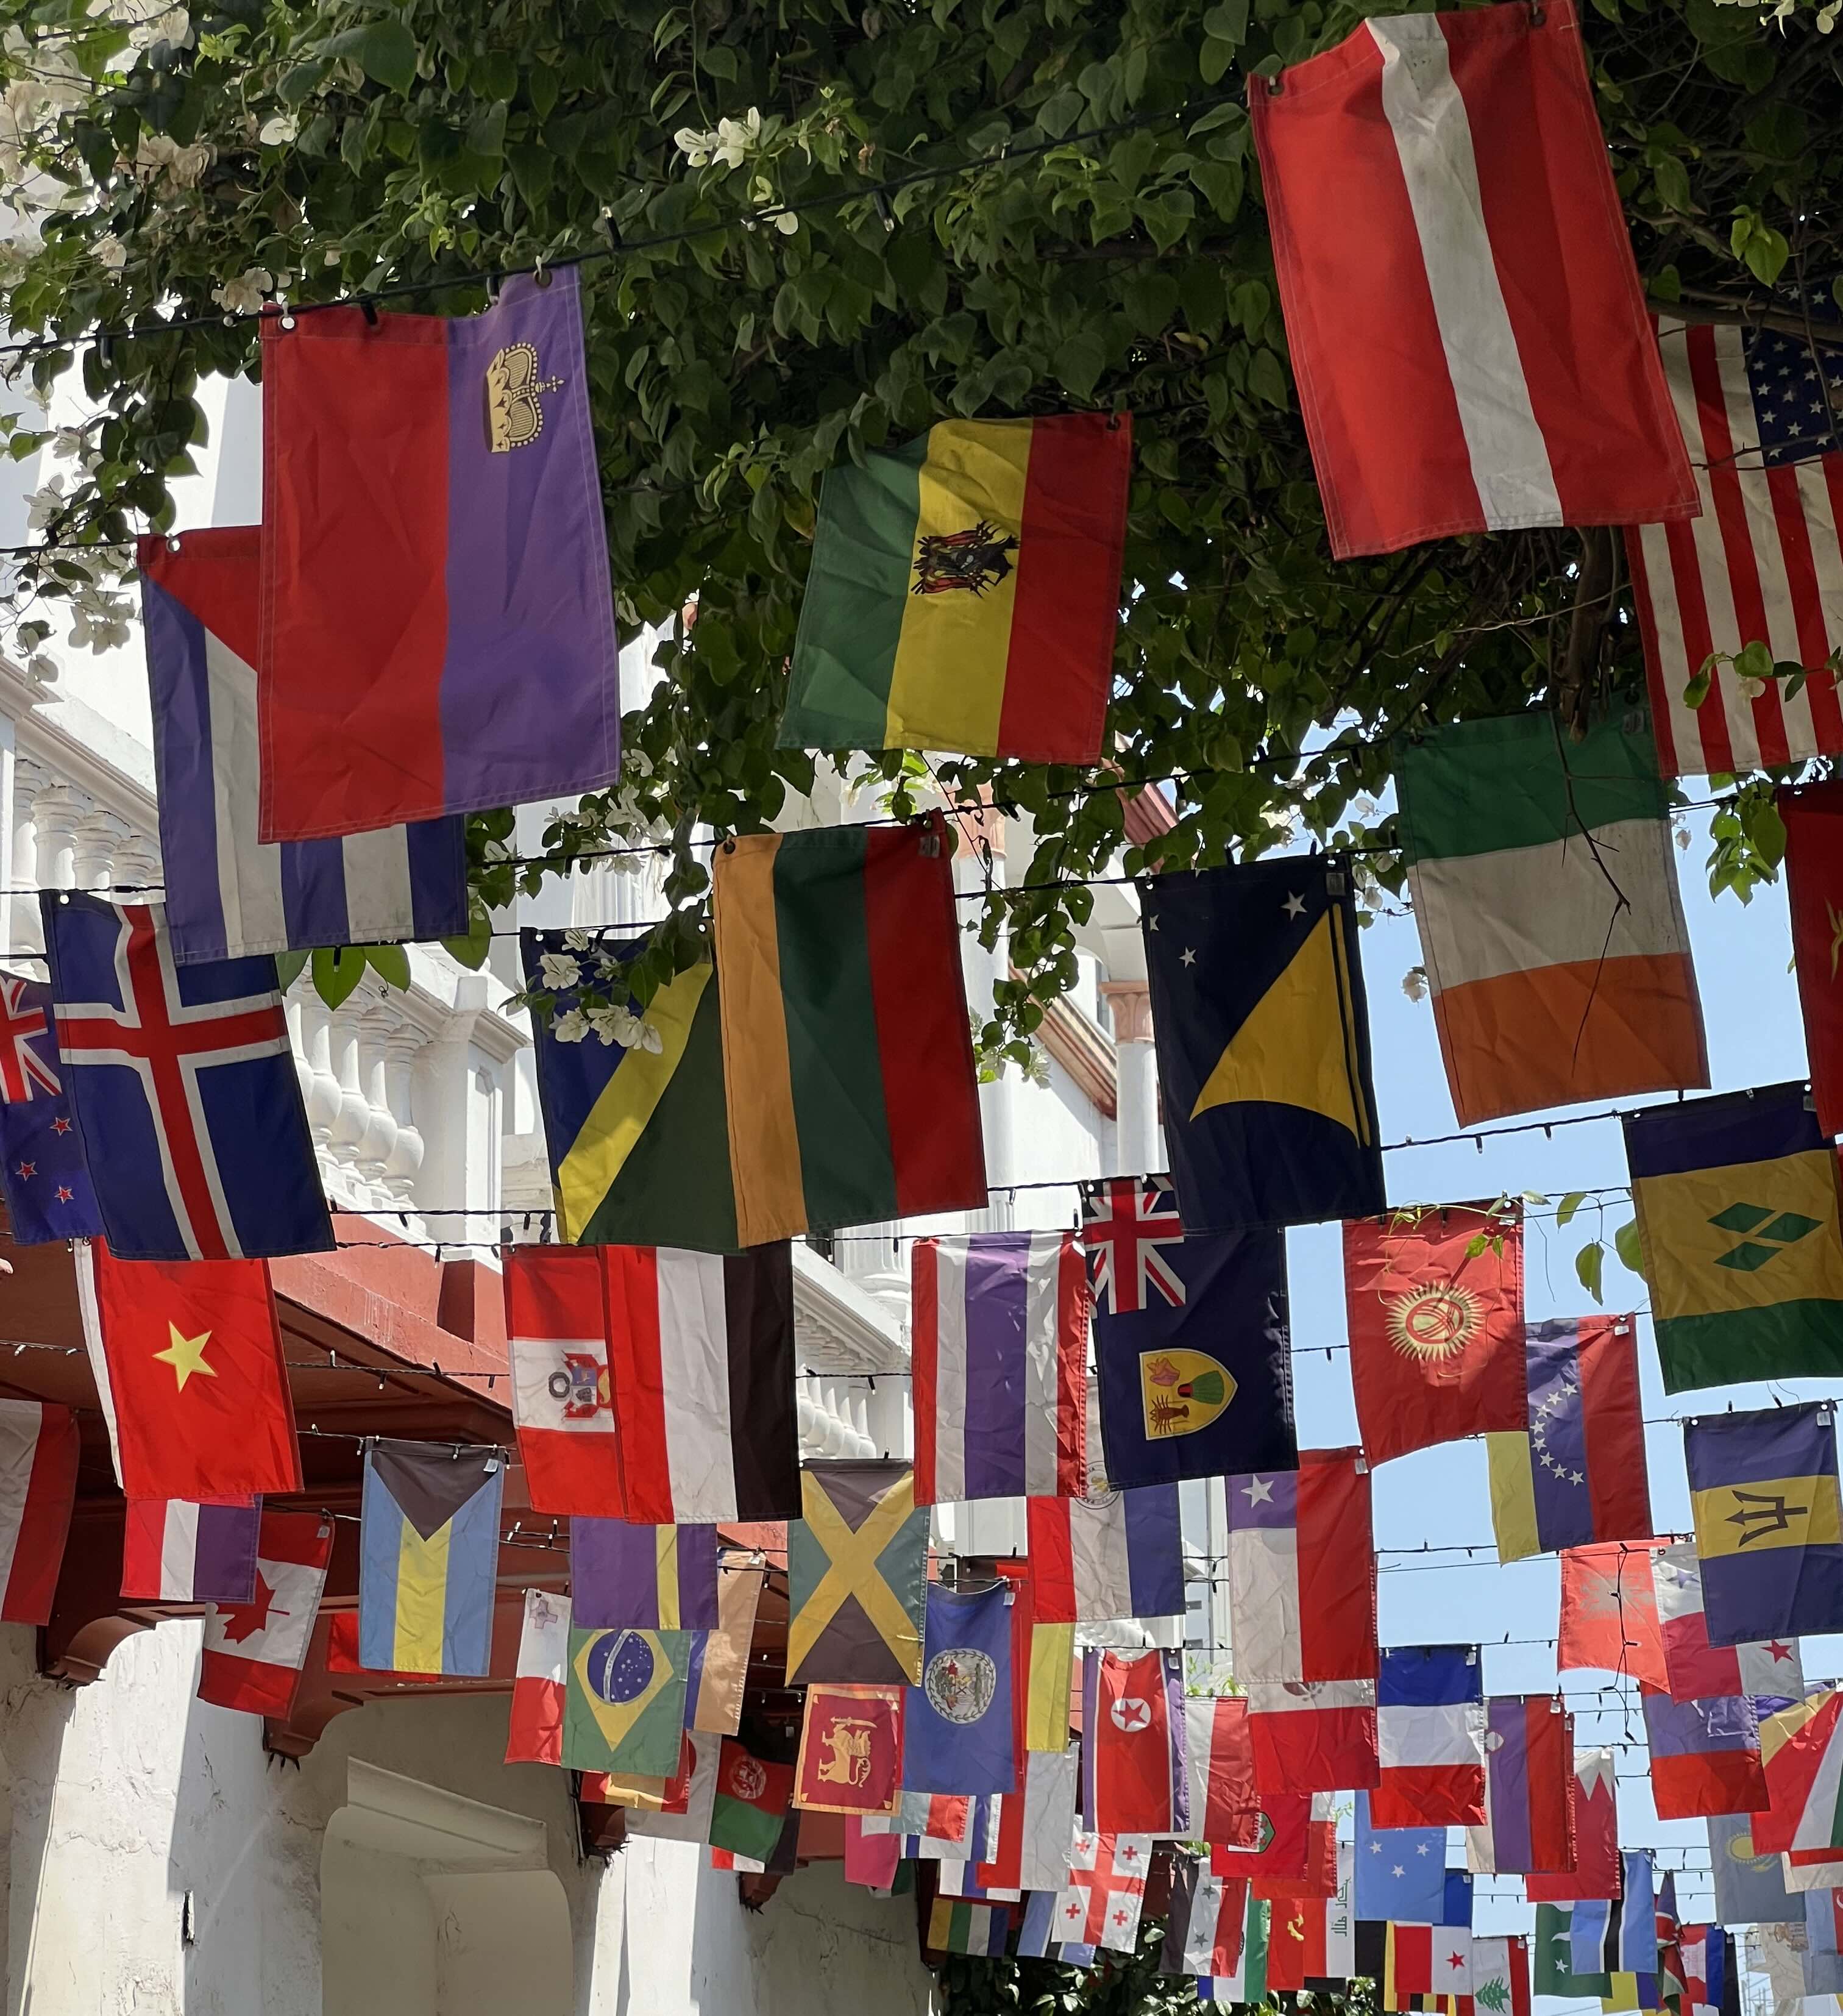 An array of international flags (including one that looks like Lithuanian) hung across a street, with green foliage peeking through.